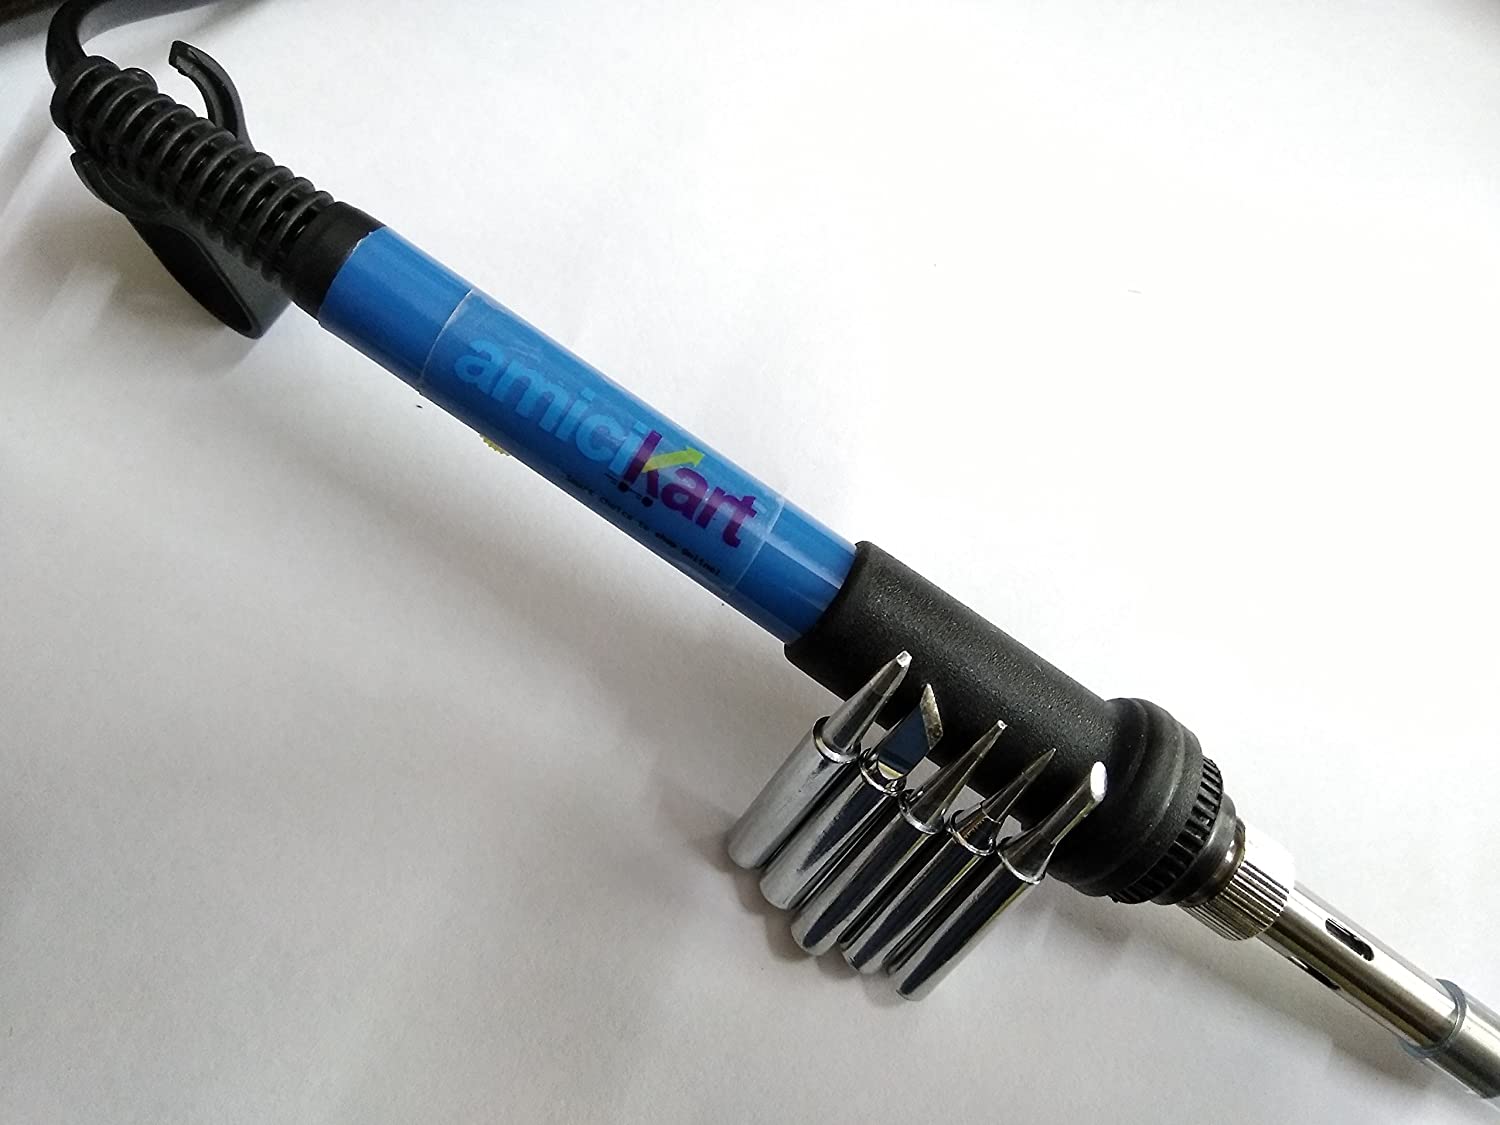 60w Soldering Iron with Ceramic Filament and 5 Bits